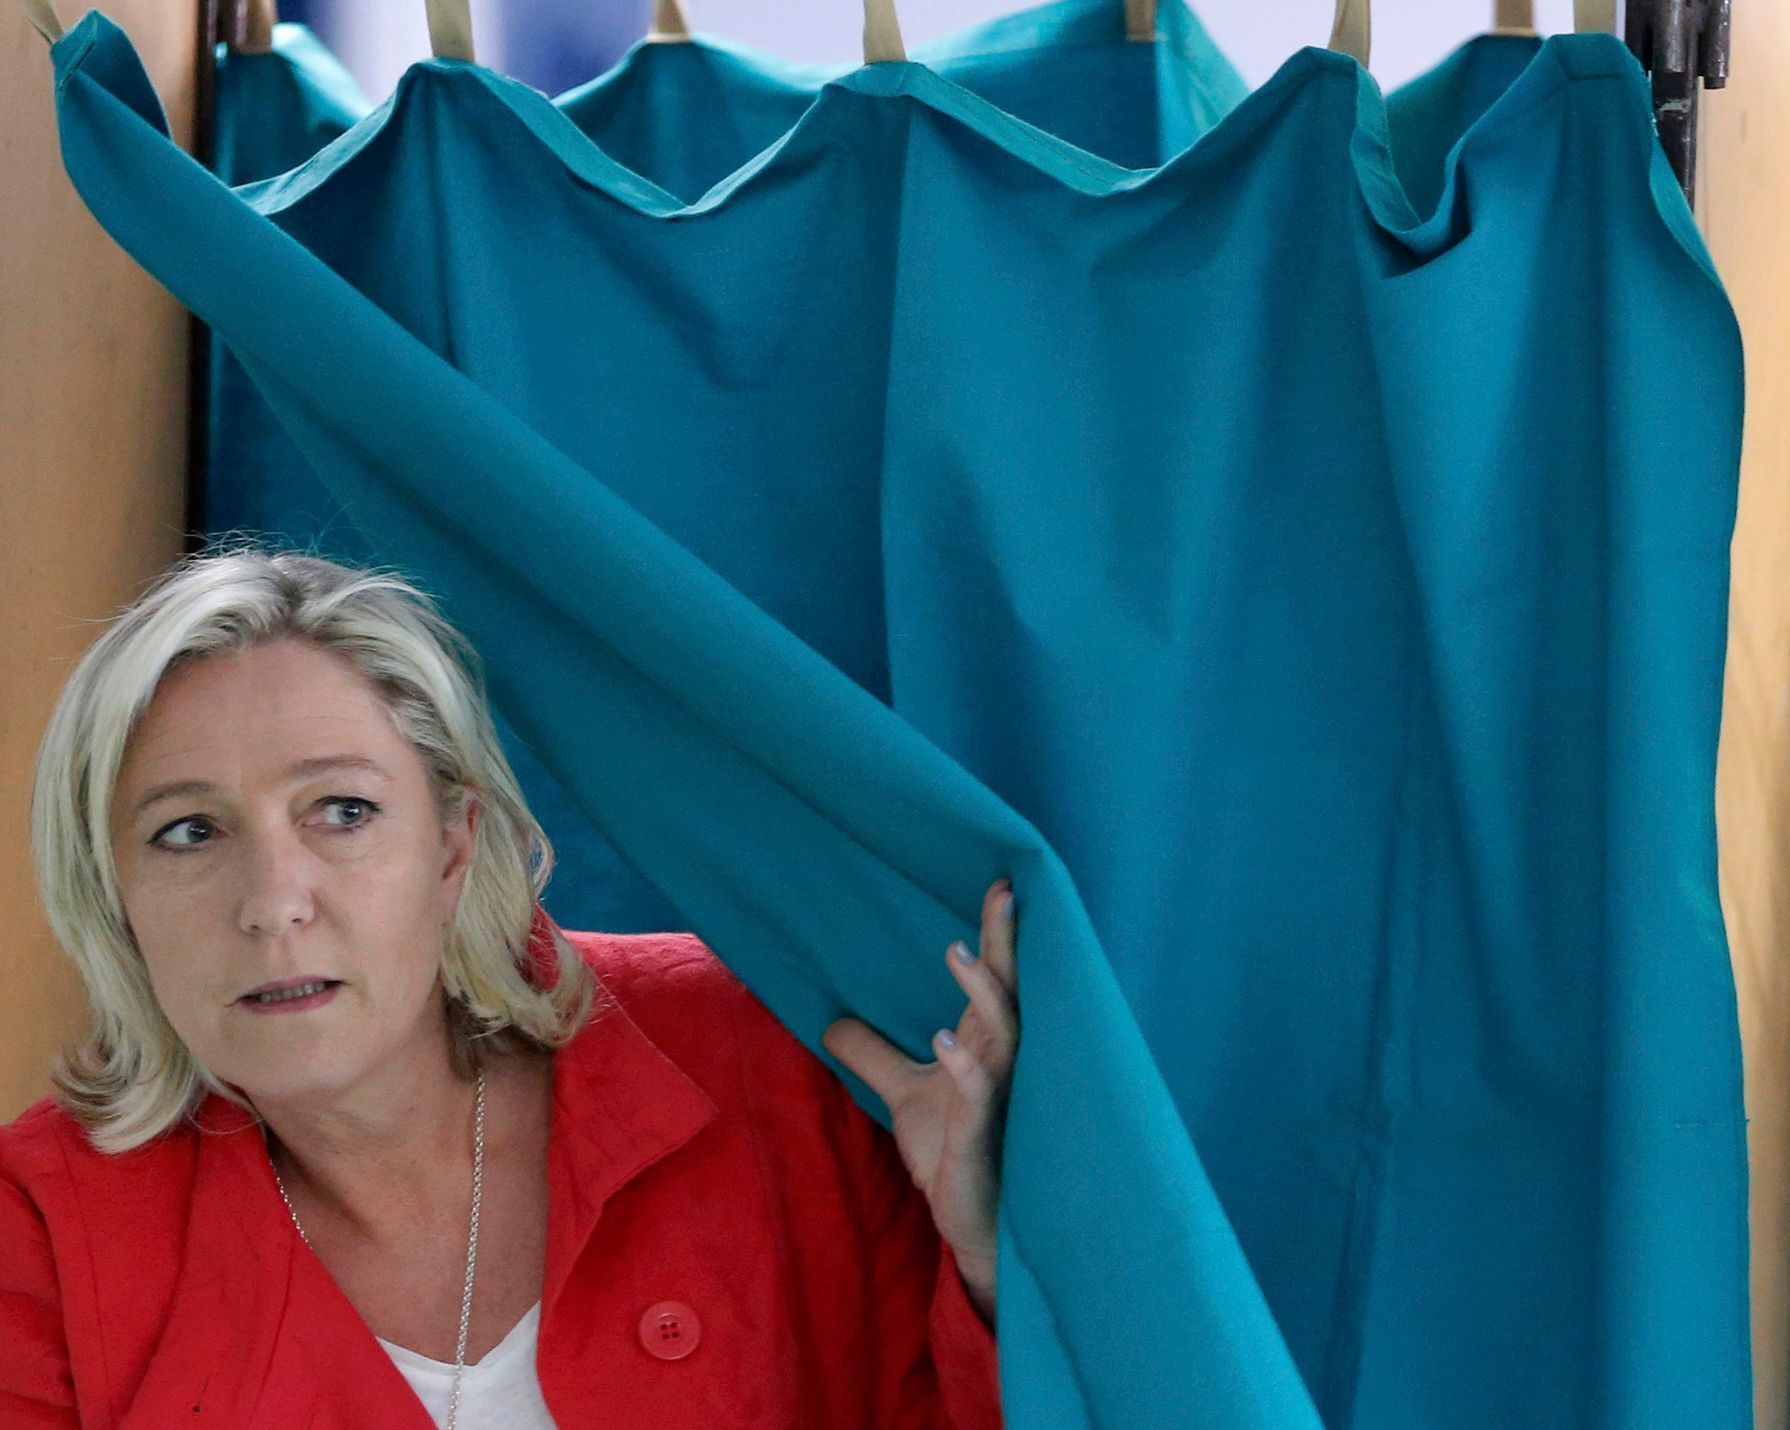 Marine Le Pen, France's National Front political party head, leaves the polling booth before casting her ballot in the European Parliament election in Henin-Beaumont